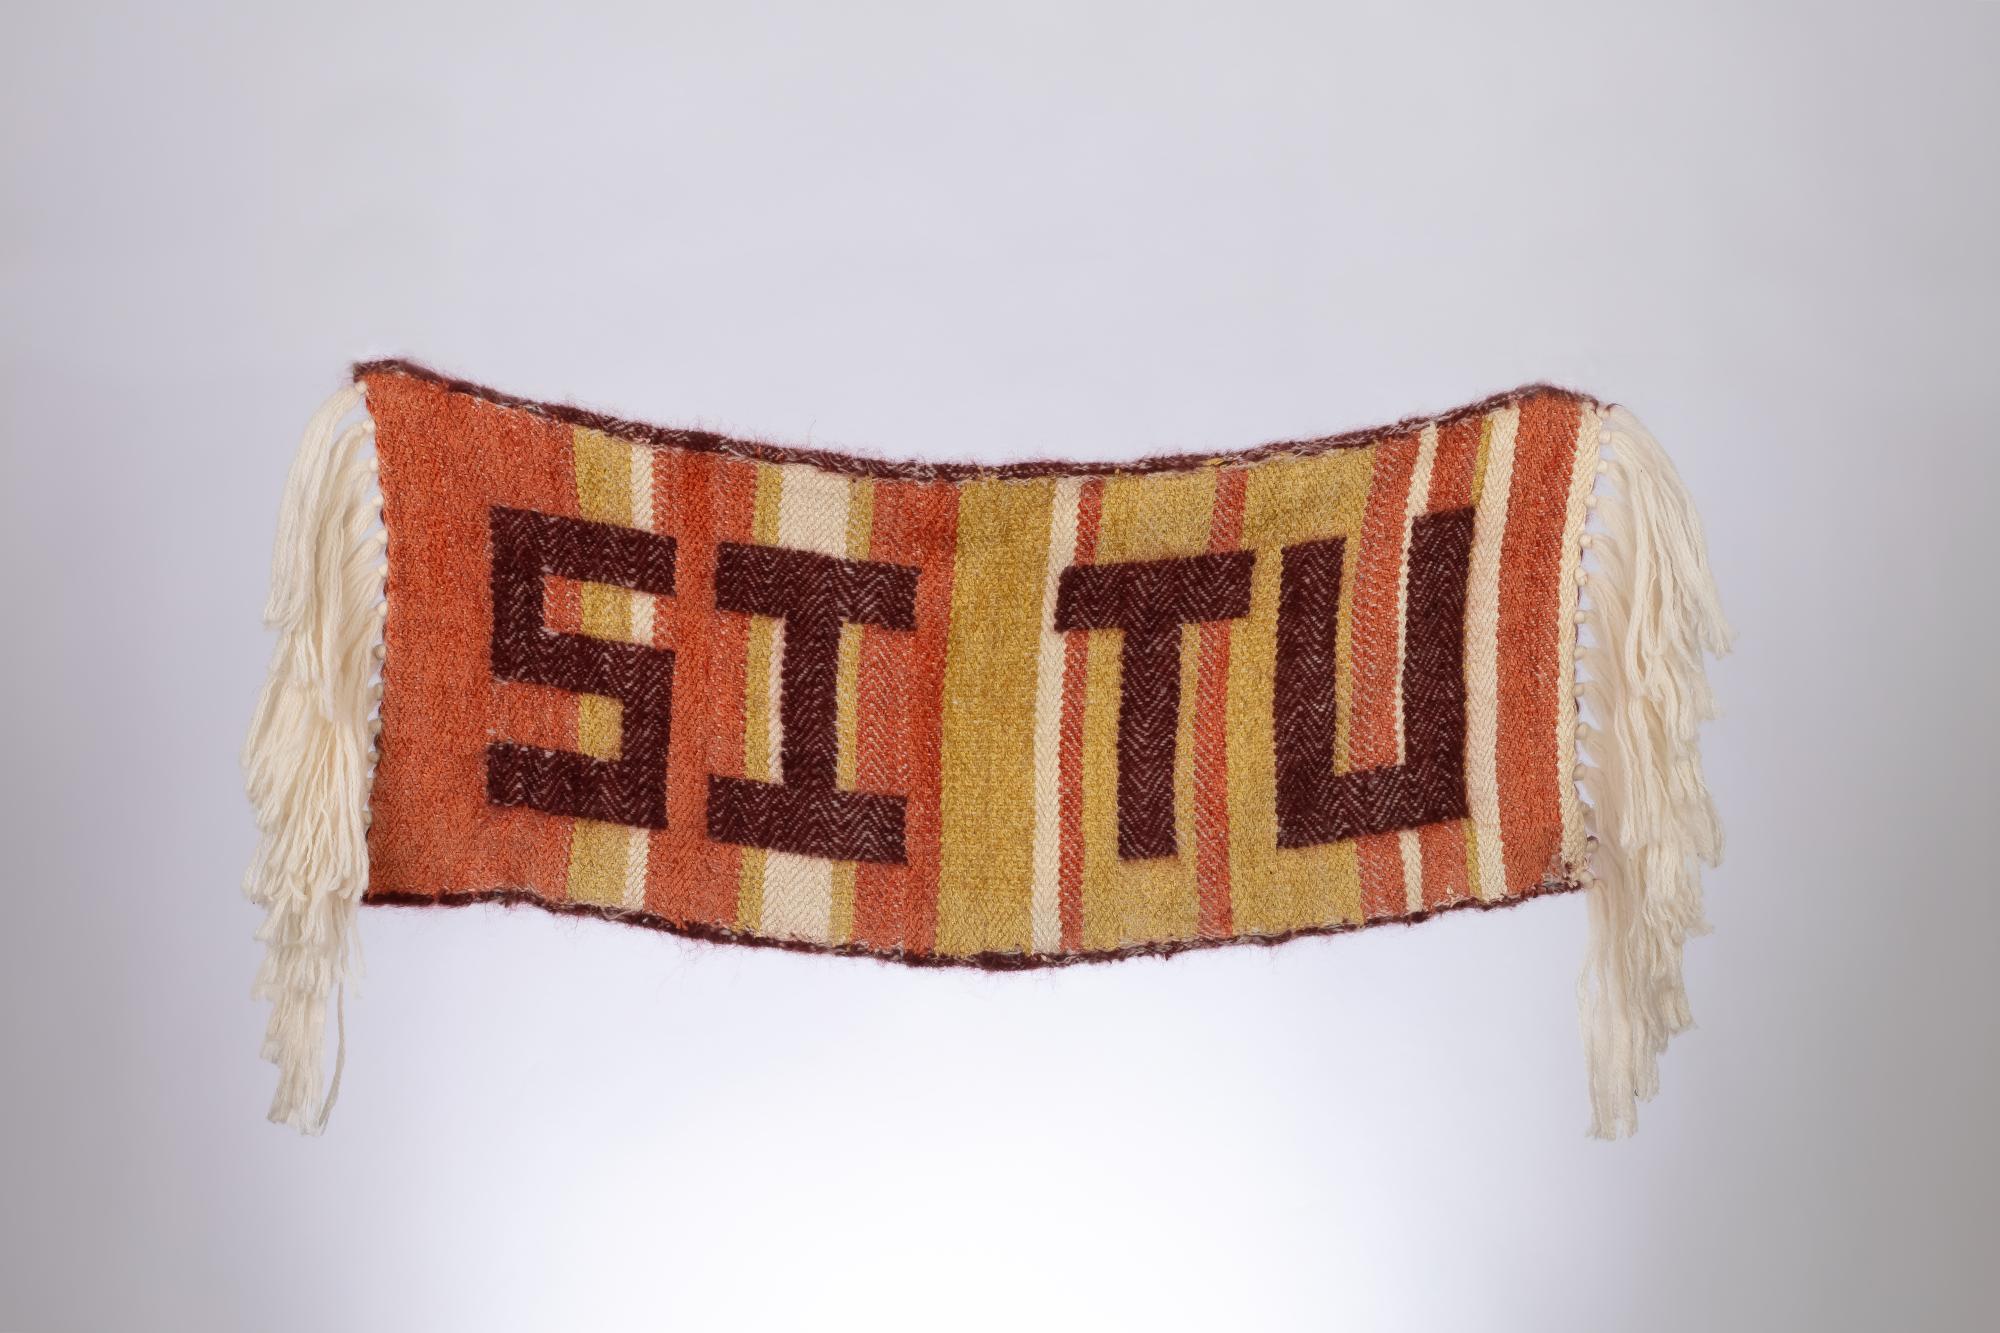 Orange, yellow and beige weaving with the letters "SI TU" in burgundy 